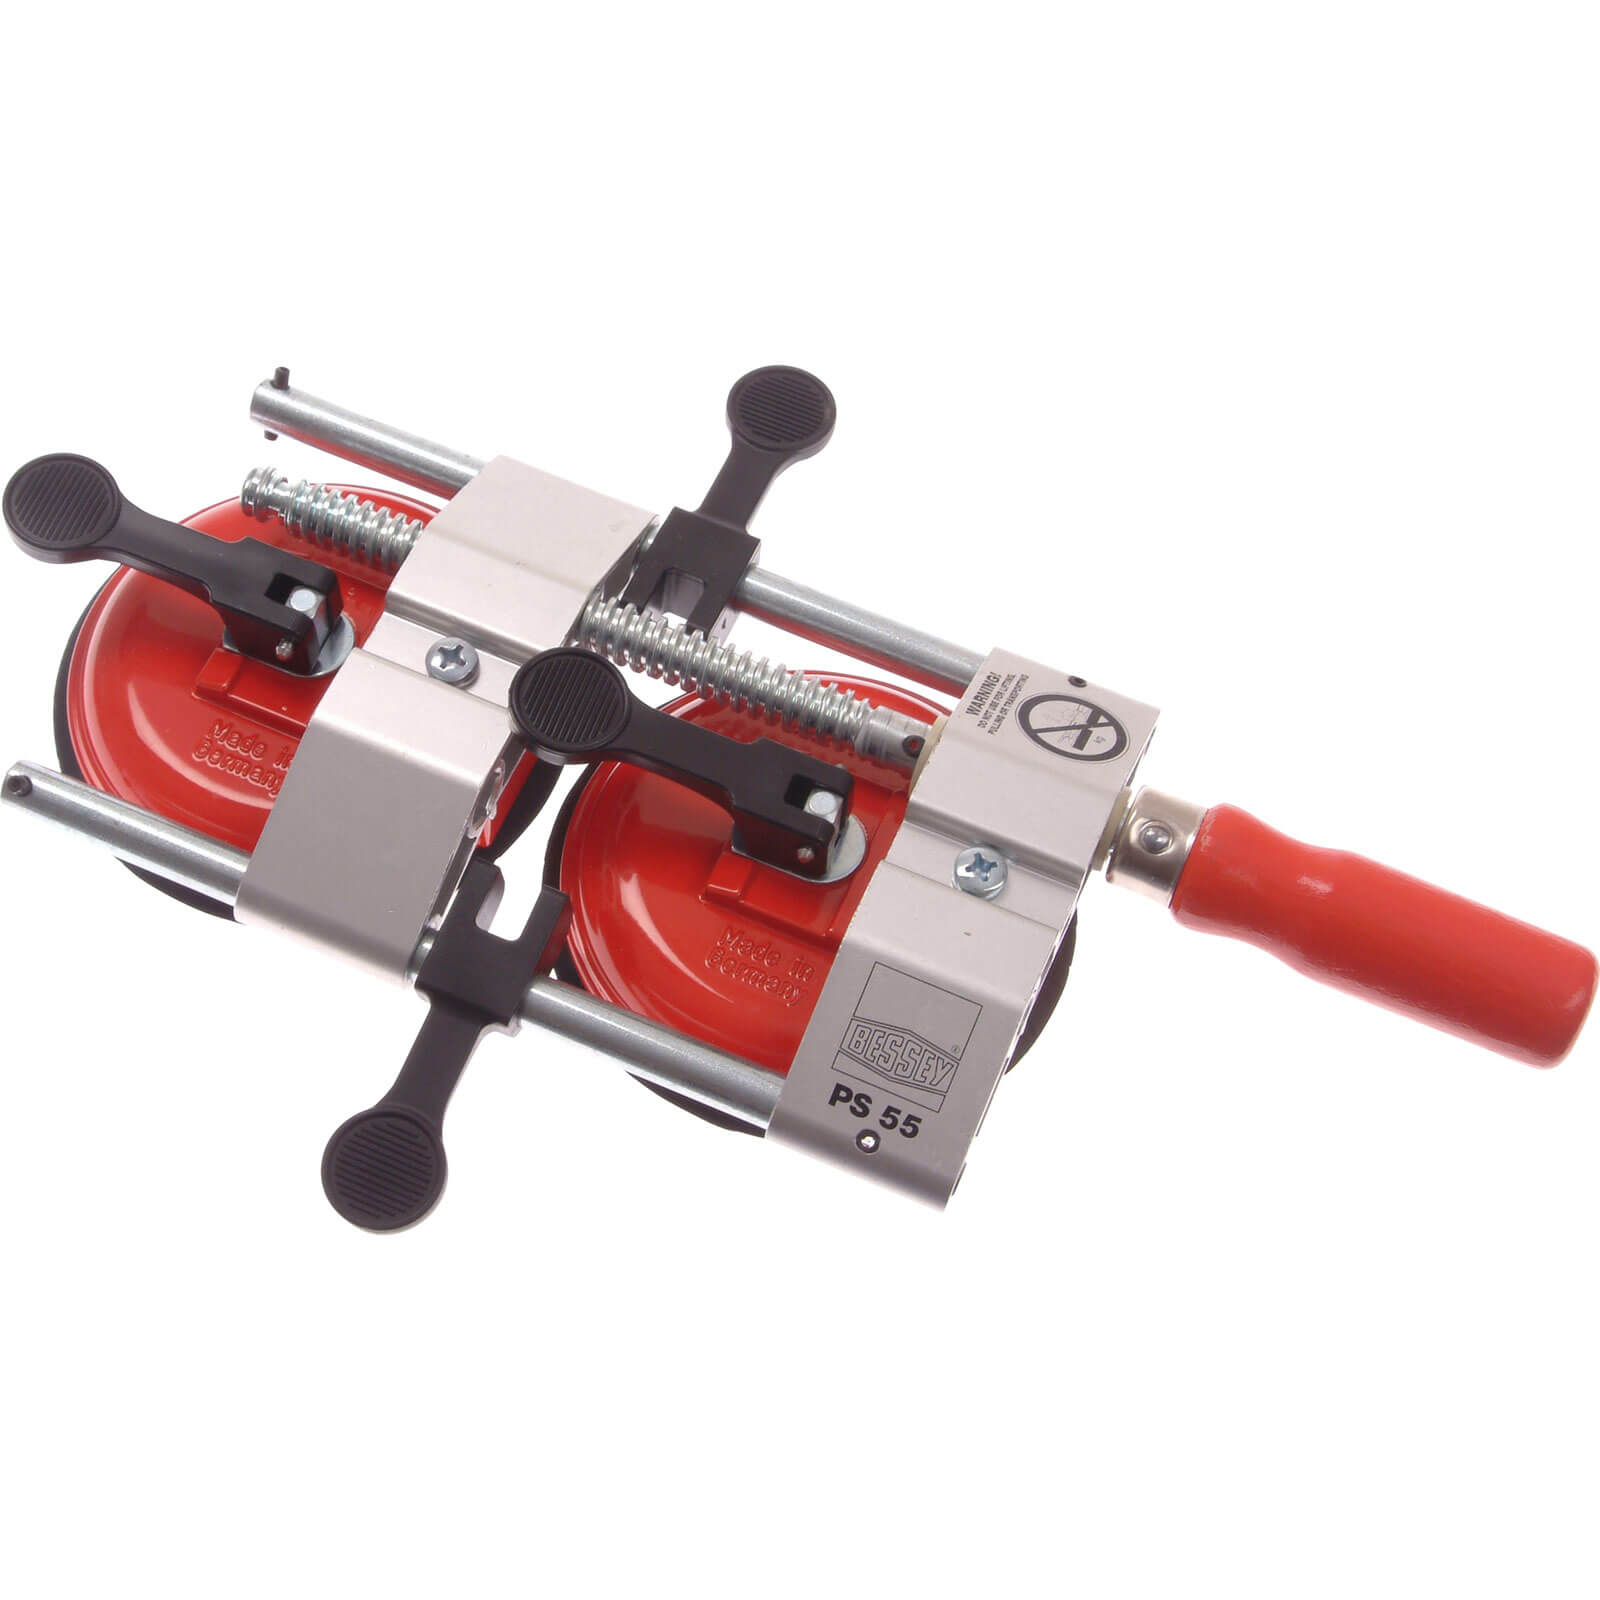 Bessey PS-55 Seaming Clamp Together Clamp